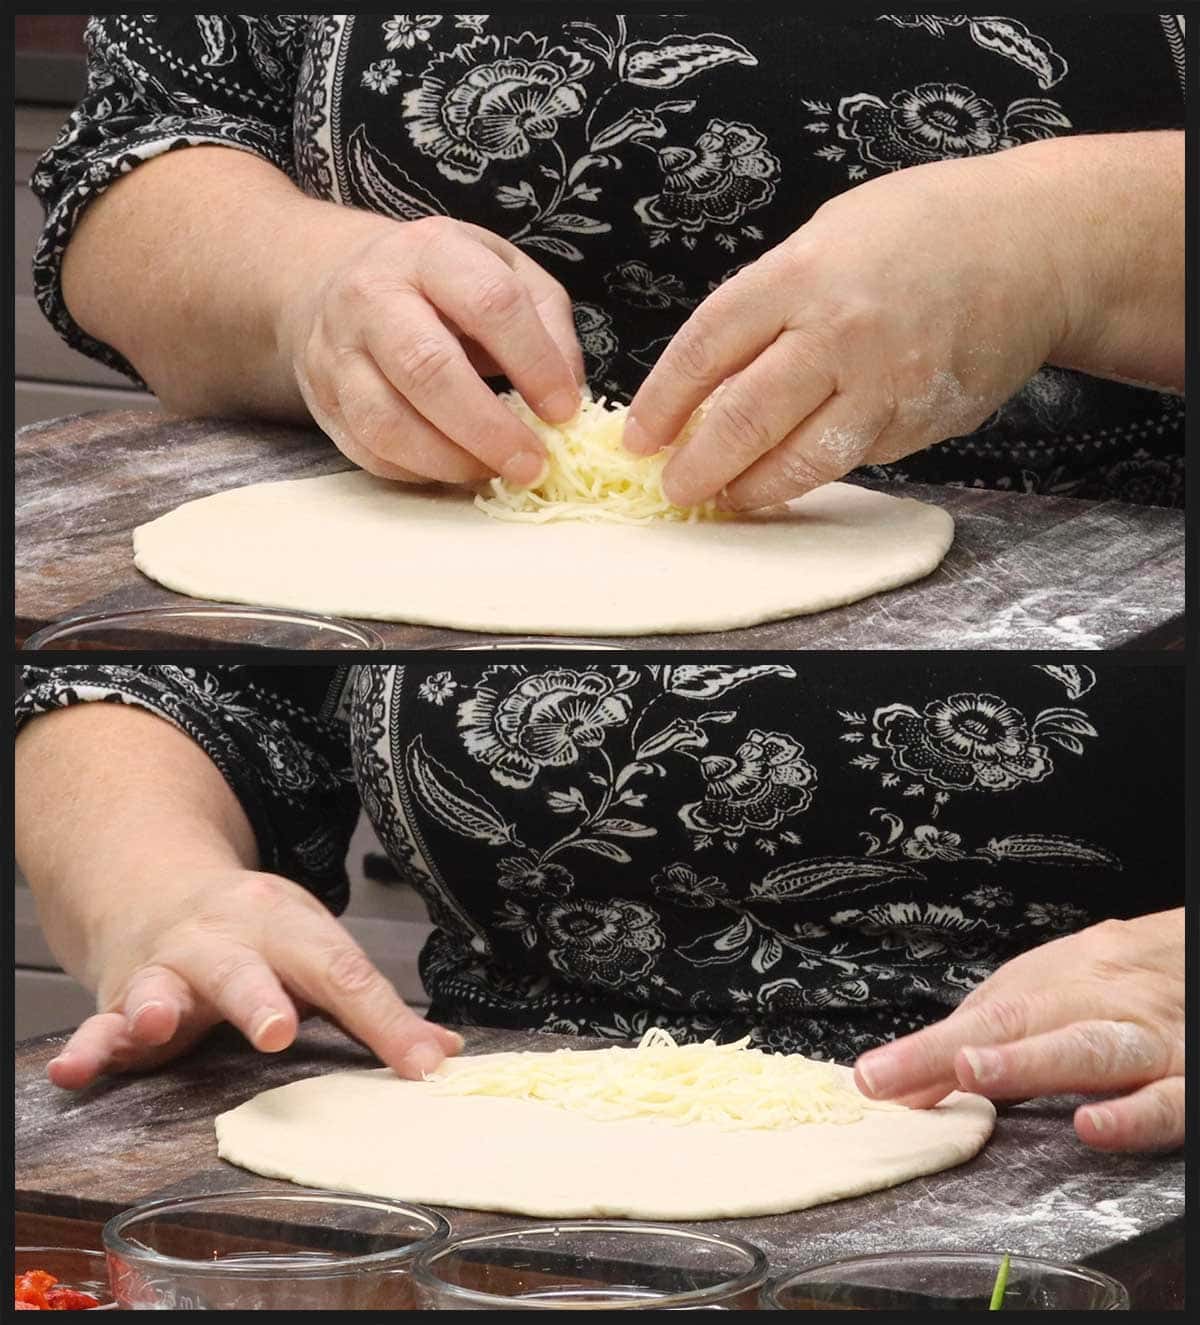 putting shredded cheese on calzon dough.